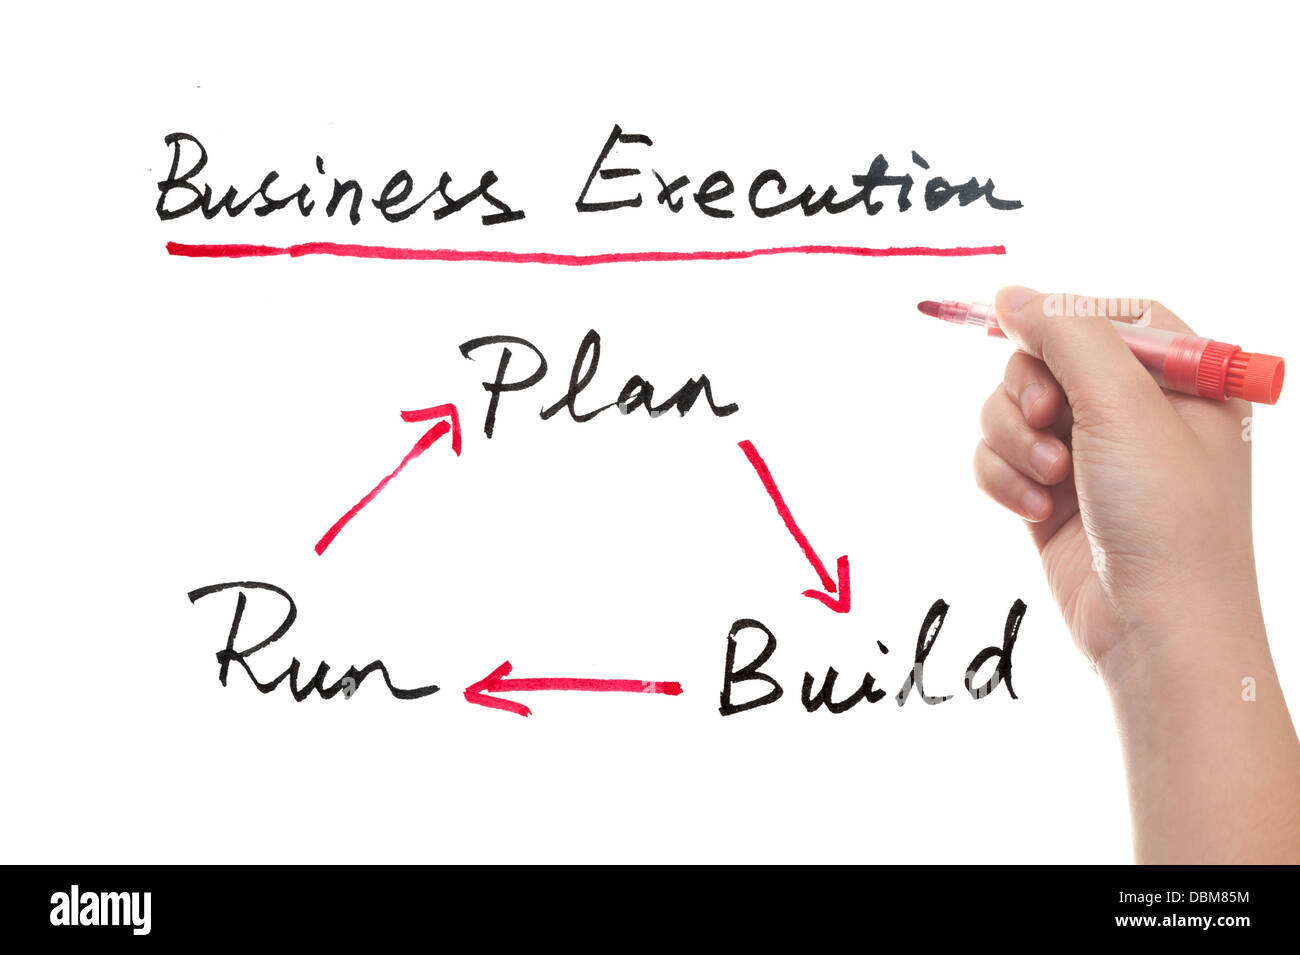 Business execution concept diagram drawn on the white board Stock Photo